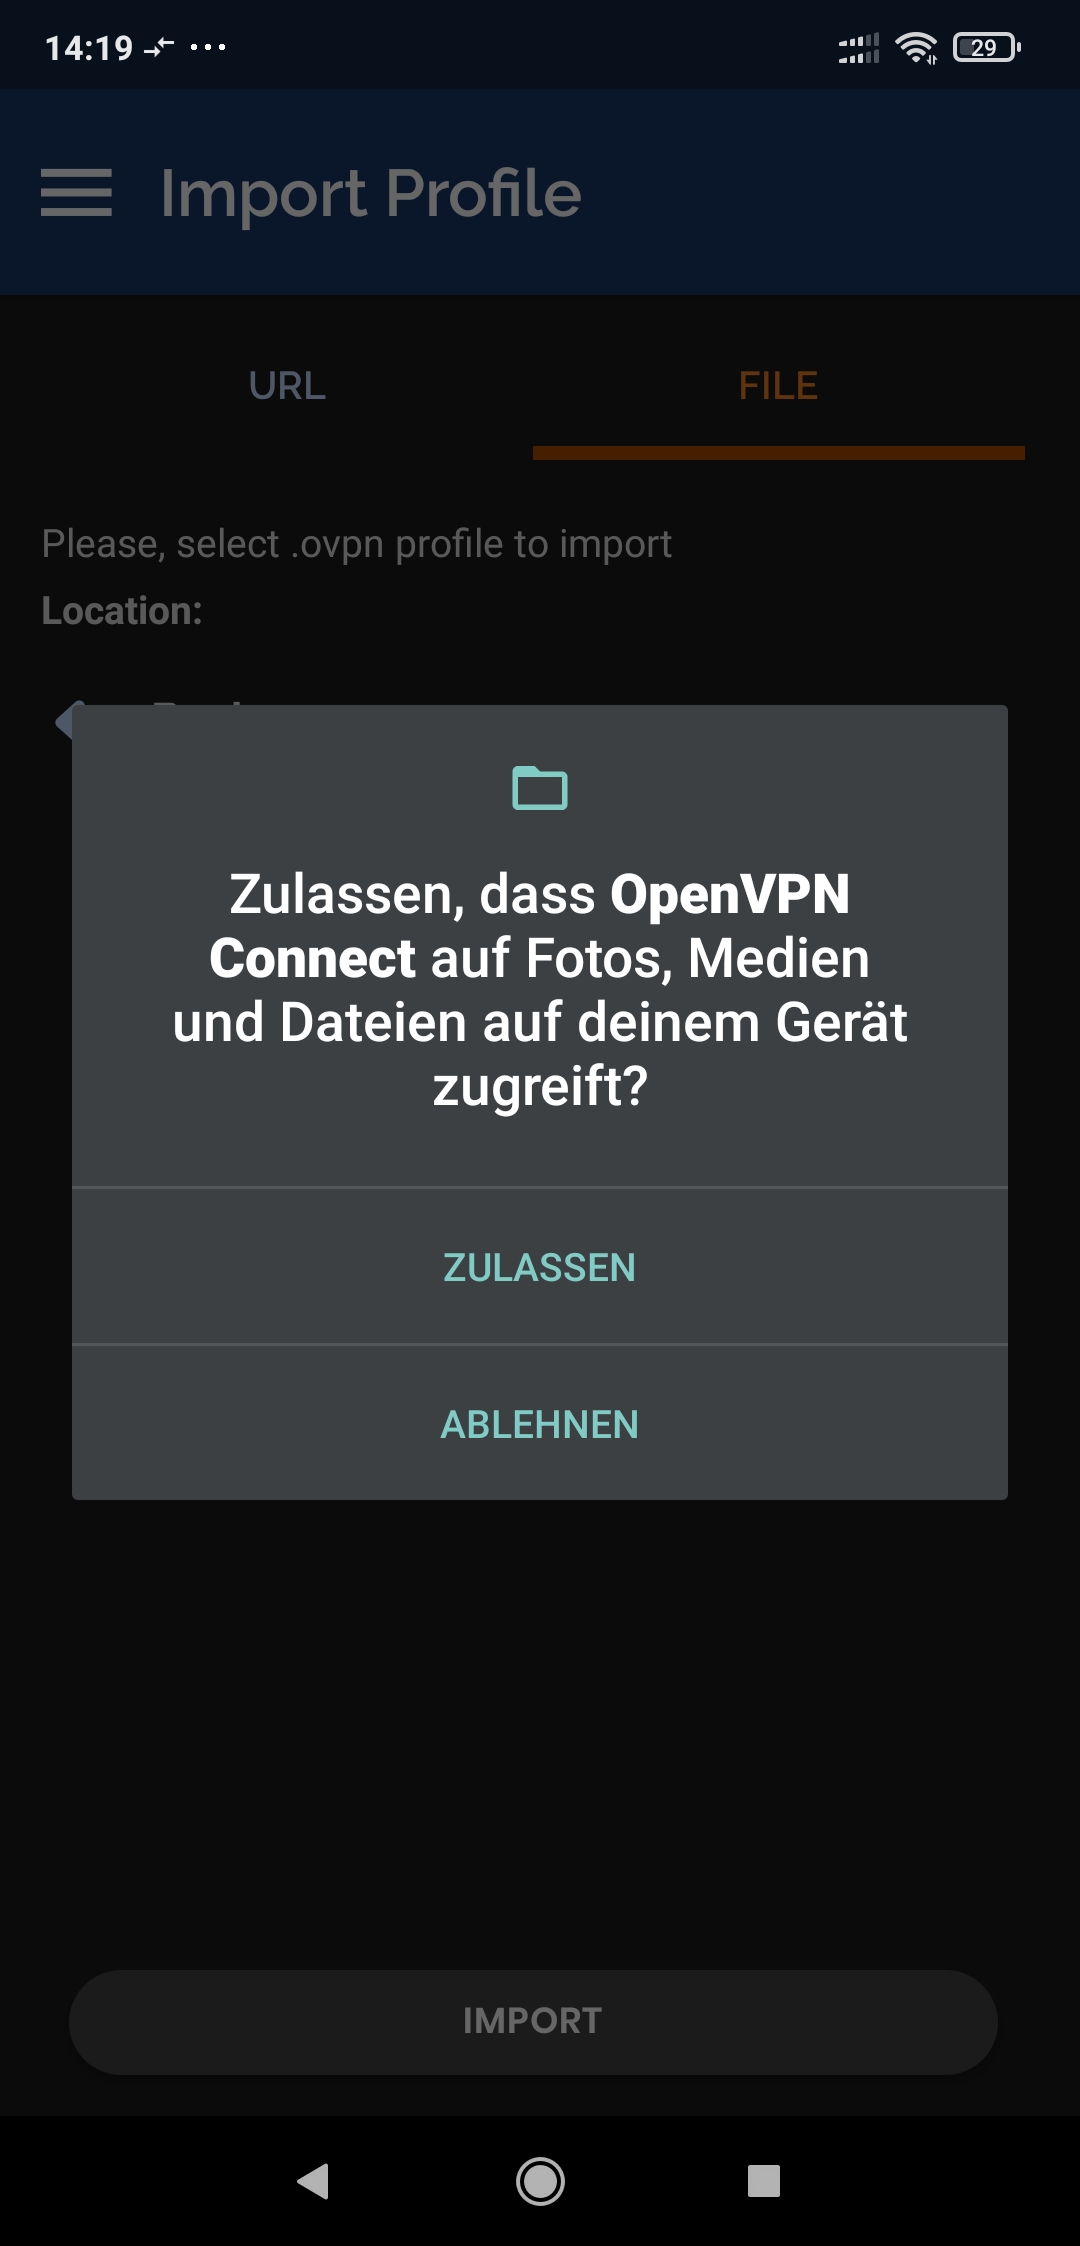 Permit OpenVPN access to photos, media and files